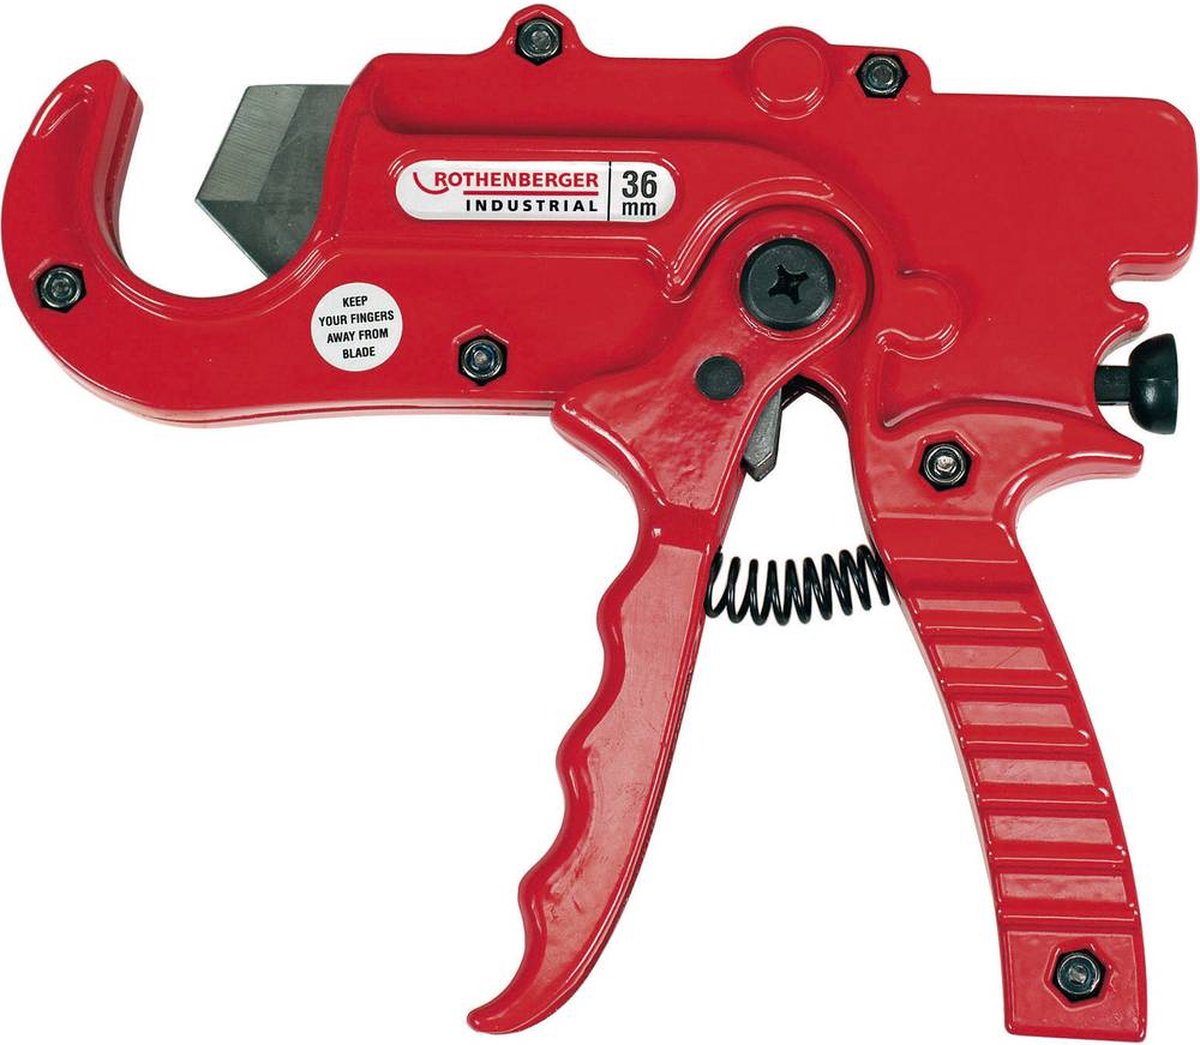 Rothenberger Industrial Plastic Pipe Cutter 36 mm 36010